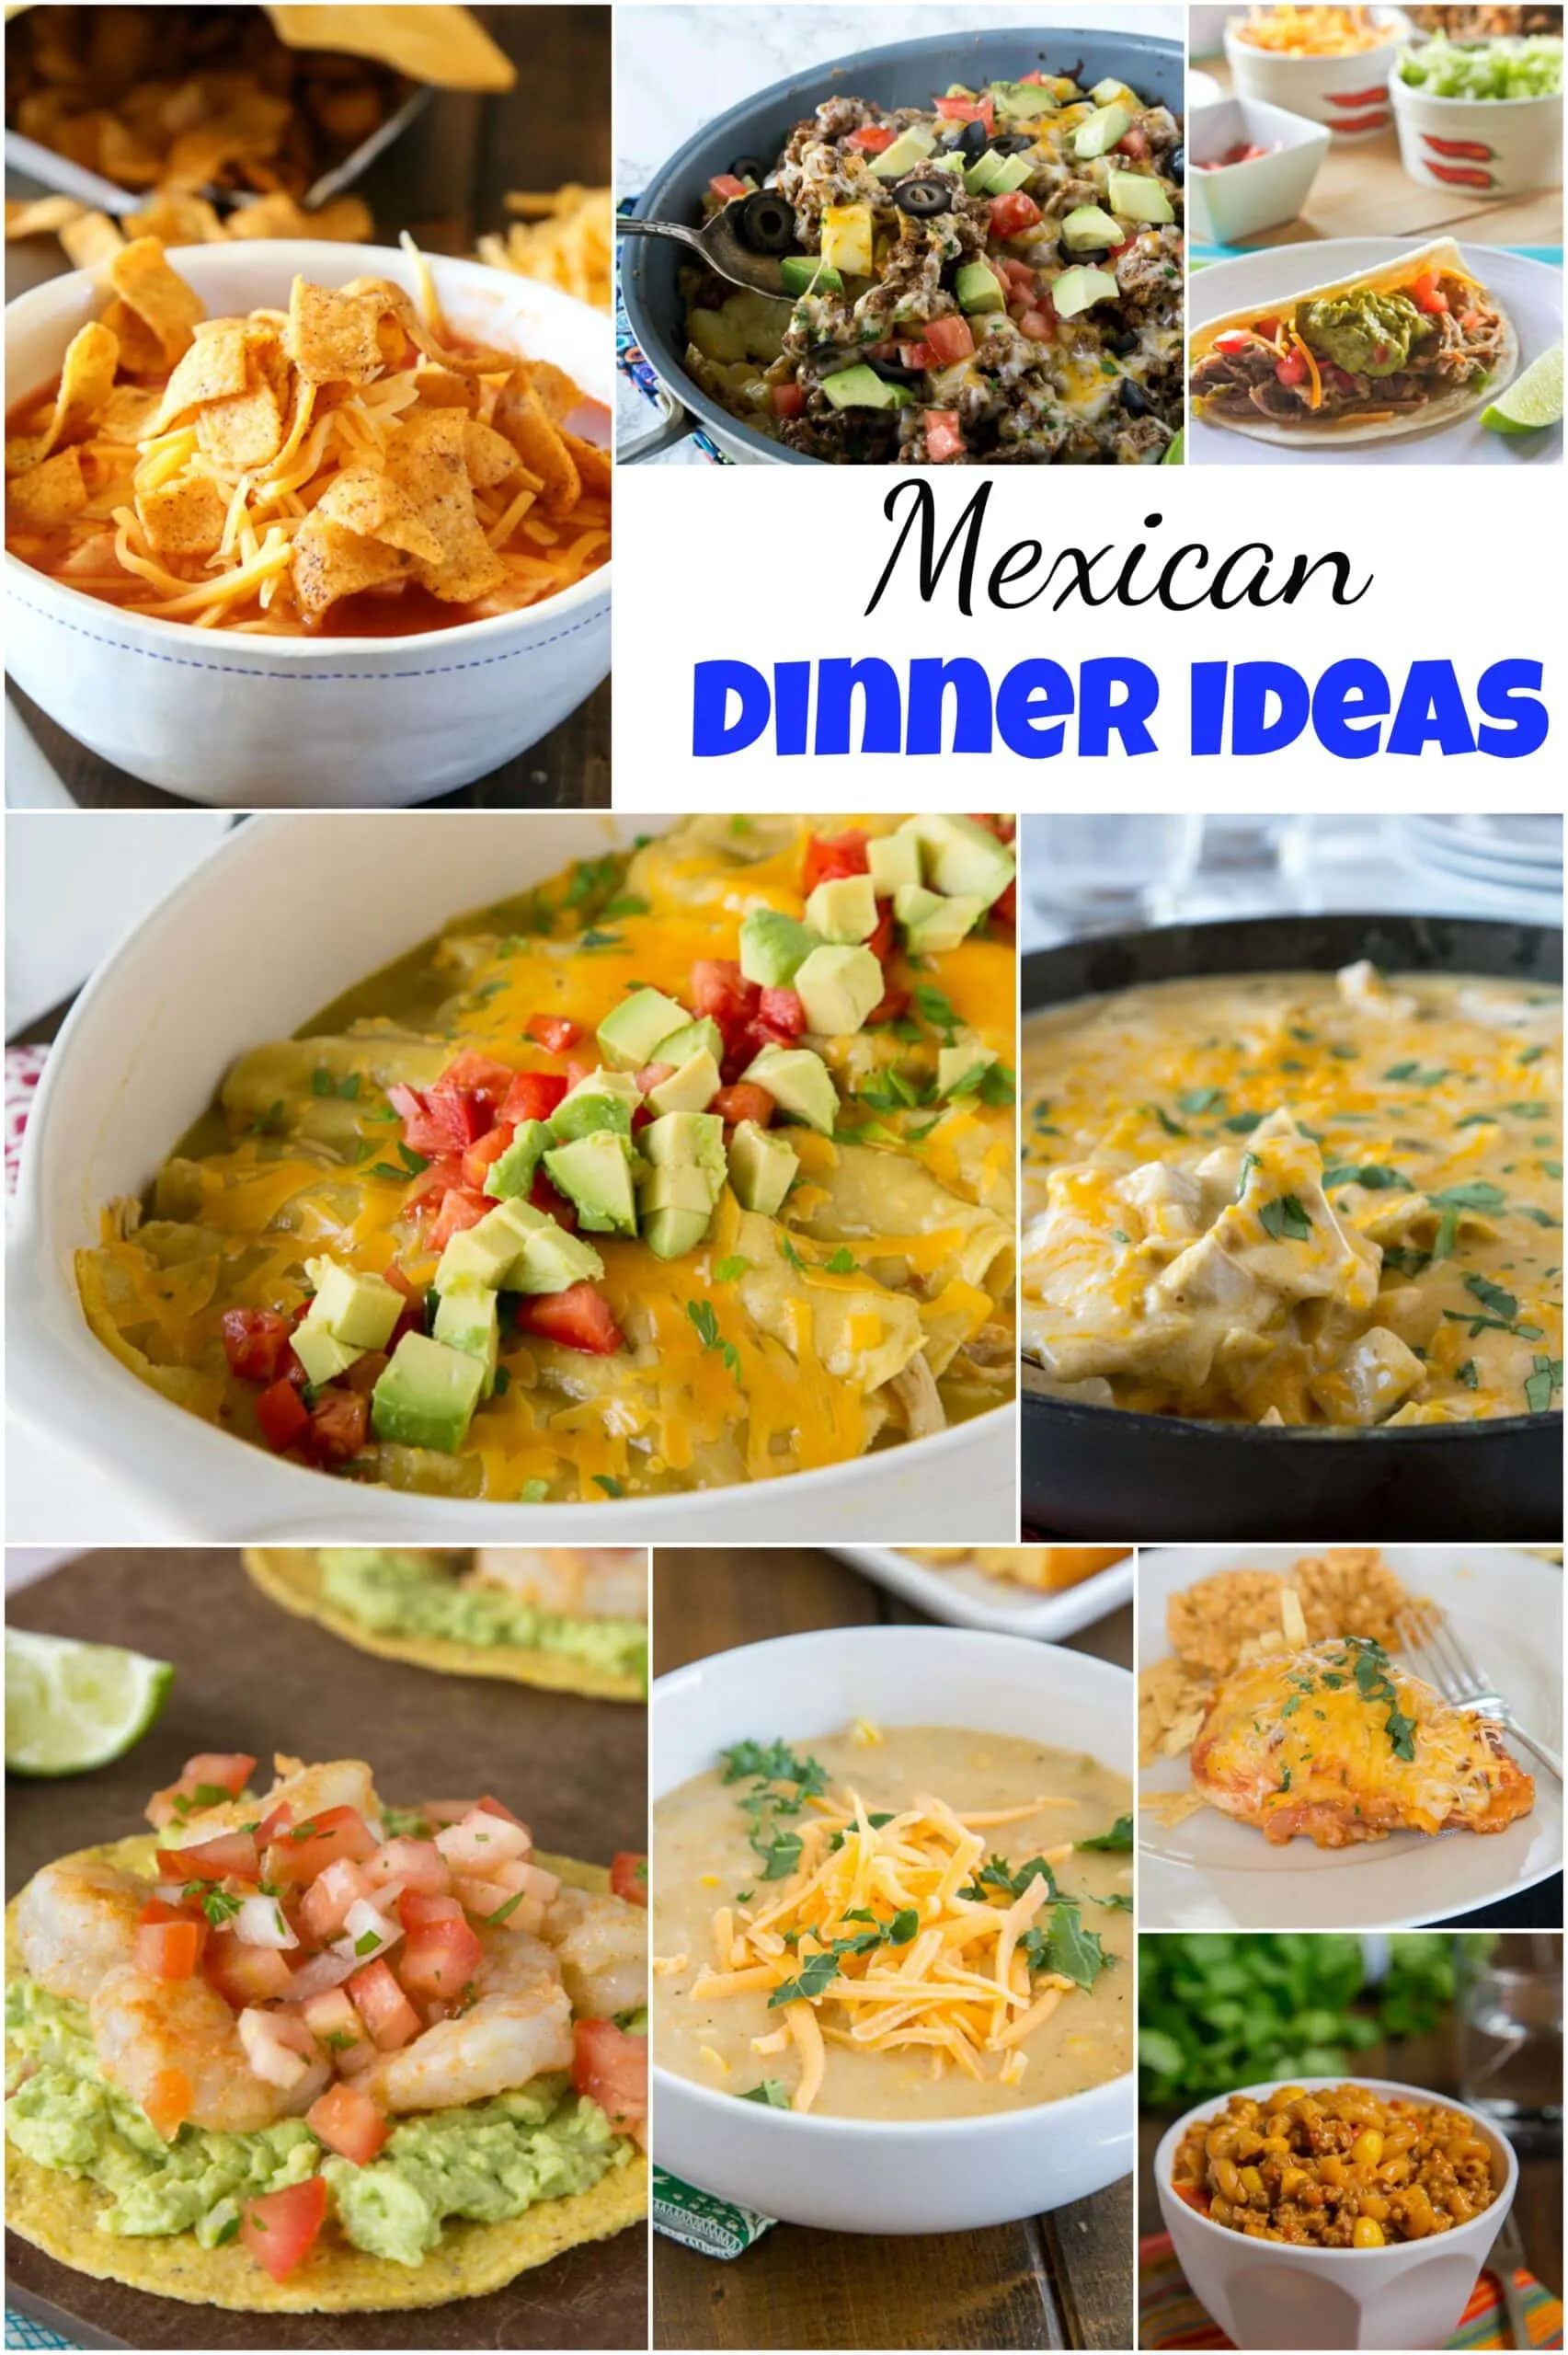 Mexican Dinner Ideas - everyone loves Mexican food!  Tacos, enchiladas, quesadillas, margaritas and more!  But sometimes you want to branch out from the norm.  Here are 25 of my favorite Mexican dinner ideas for any night of the week!